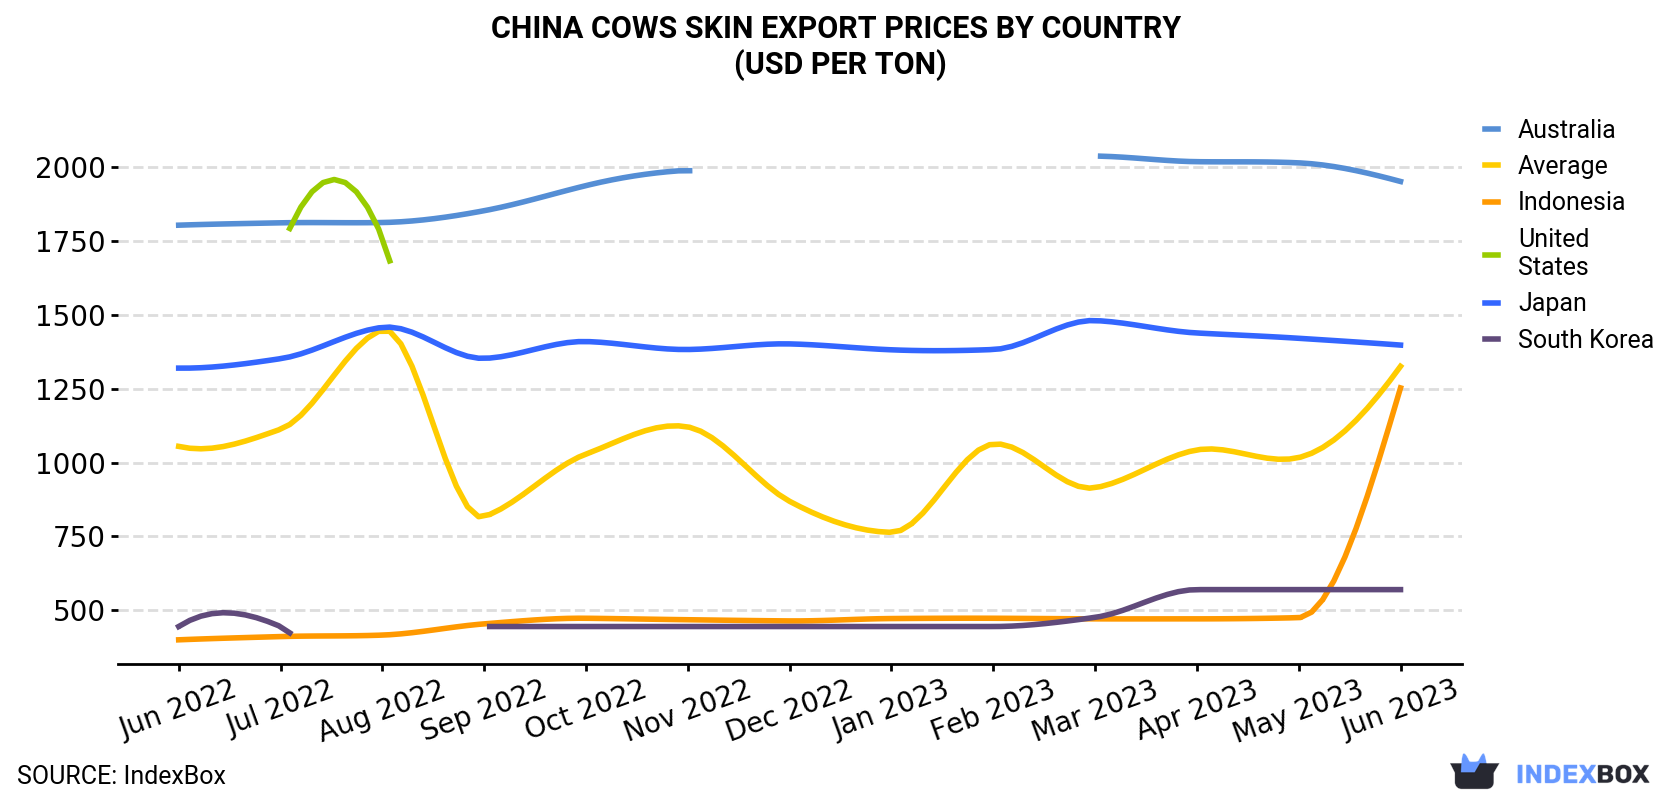 China Cows Skin Export Prices By Country (USD Per Ton)